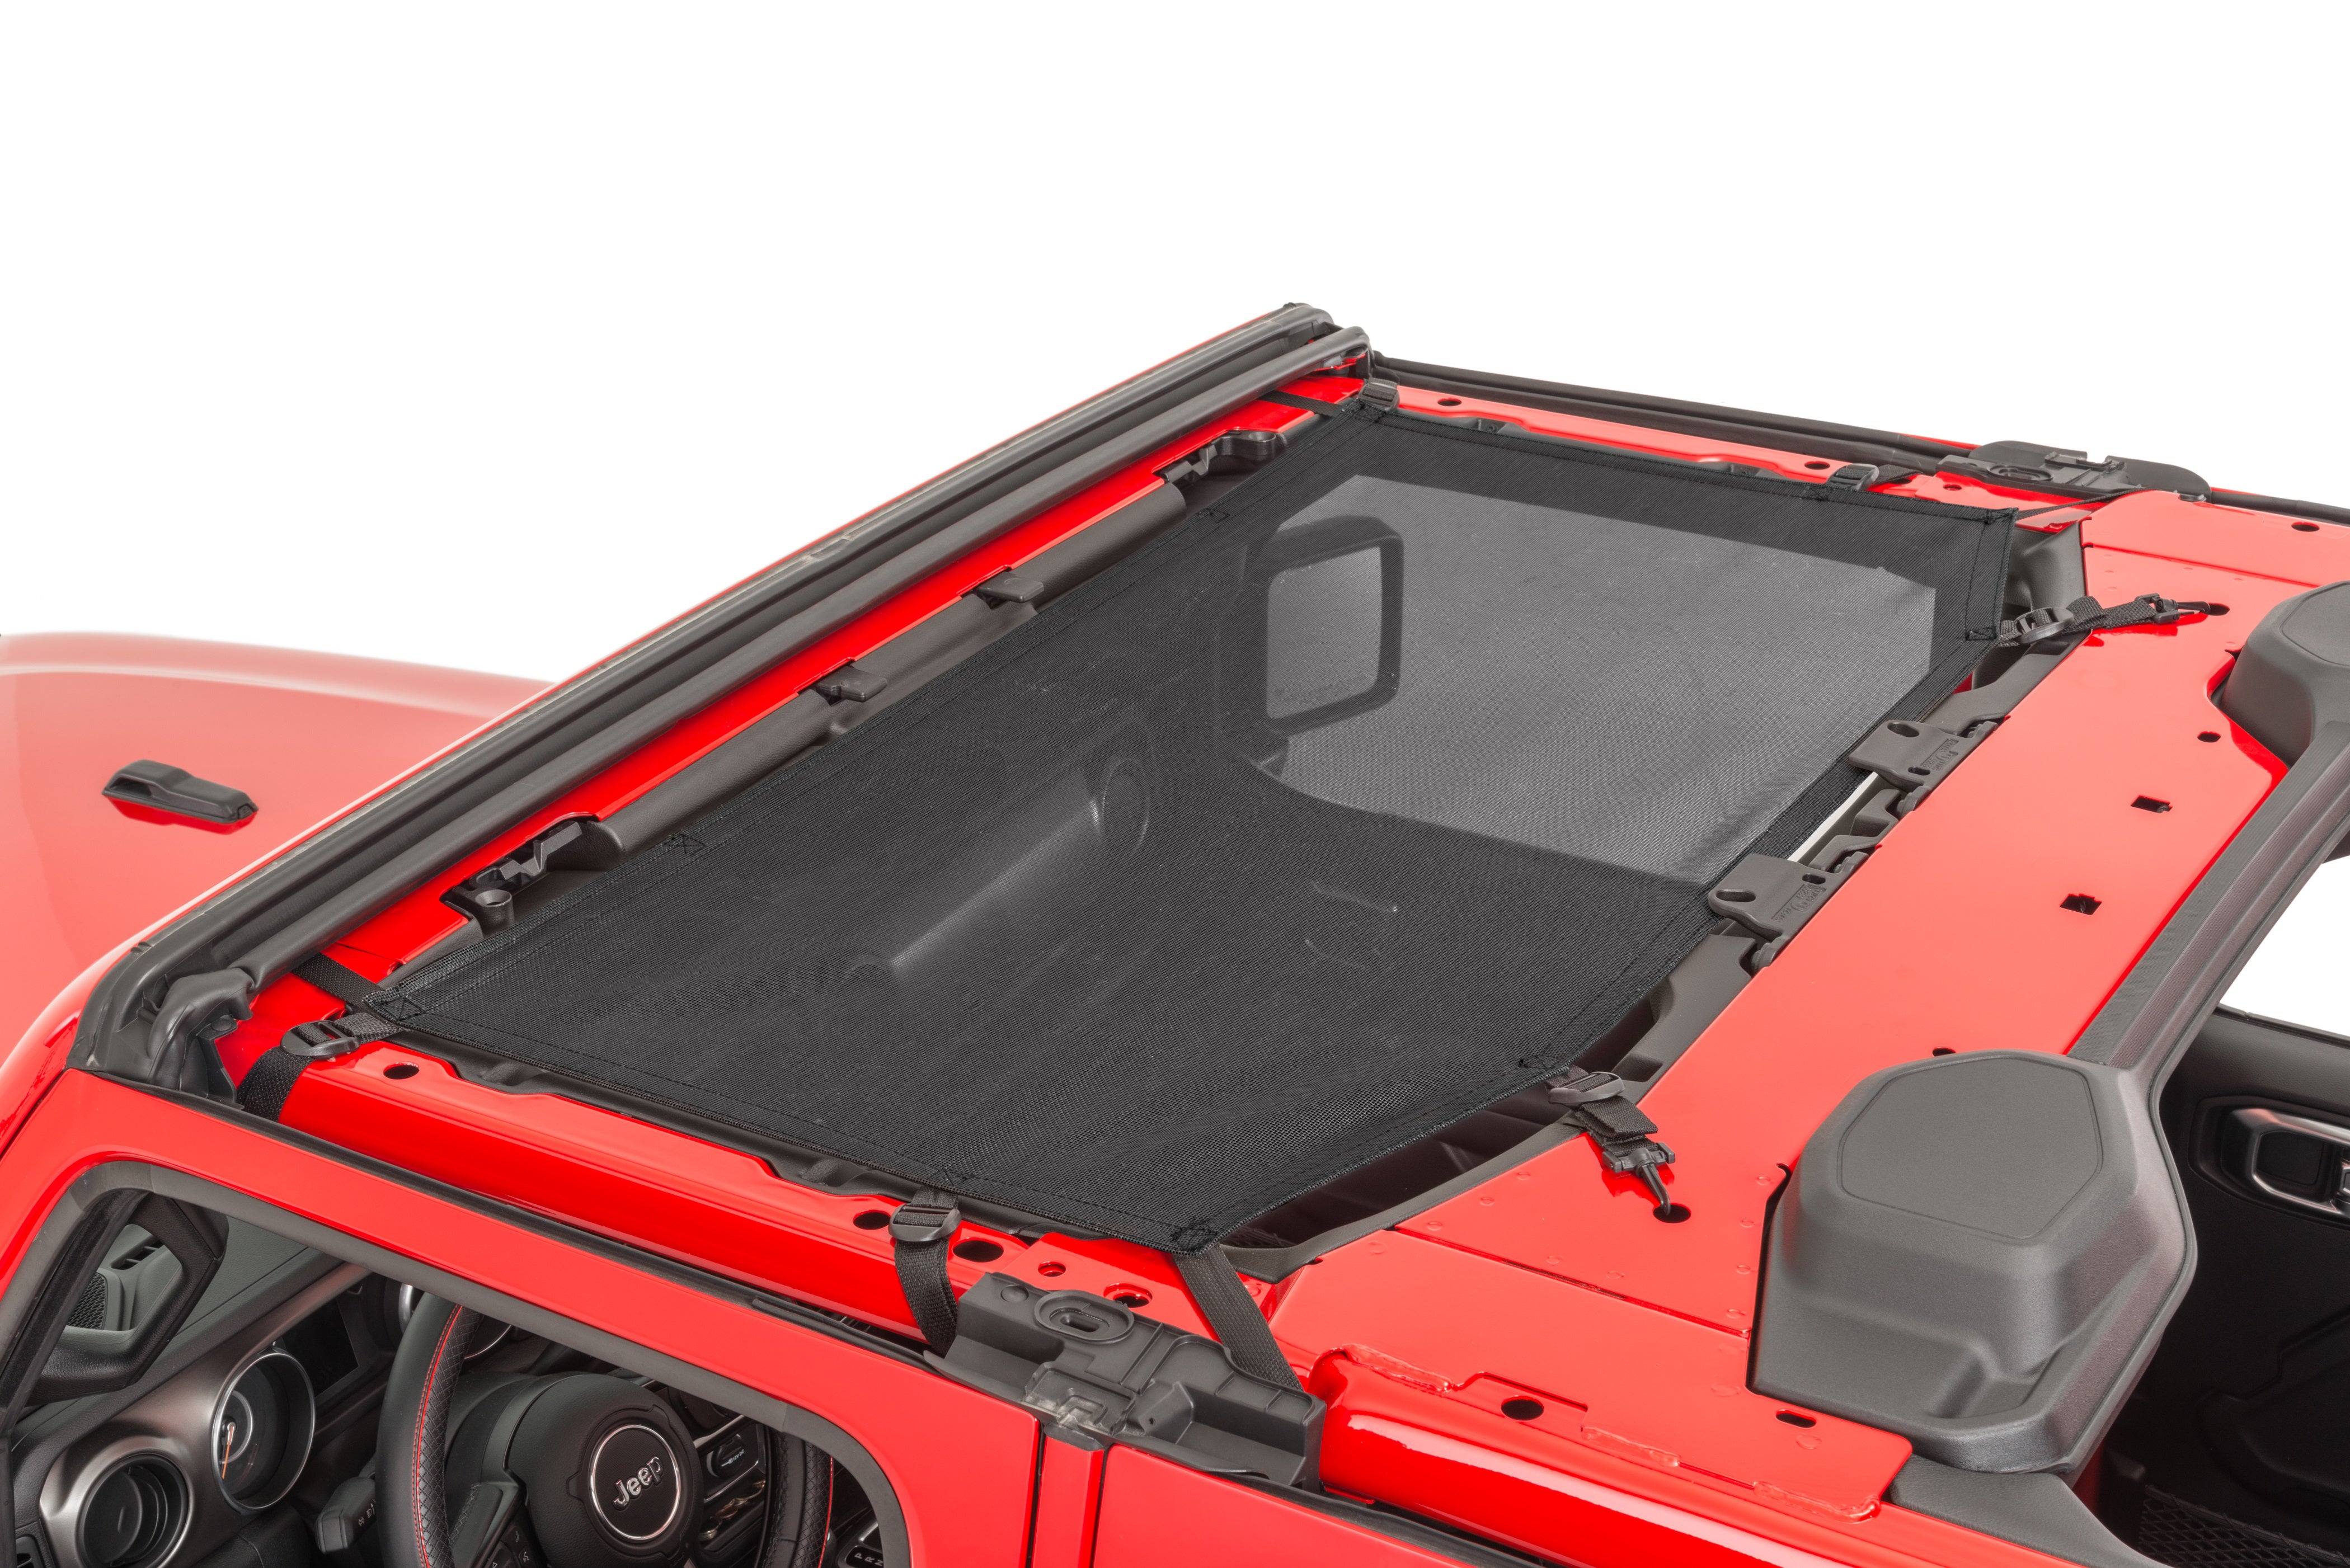 Secures To Windshield And Roll Bar